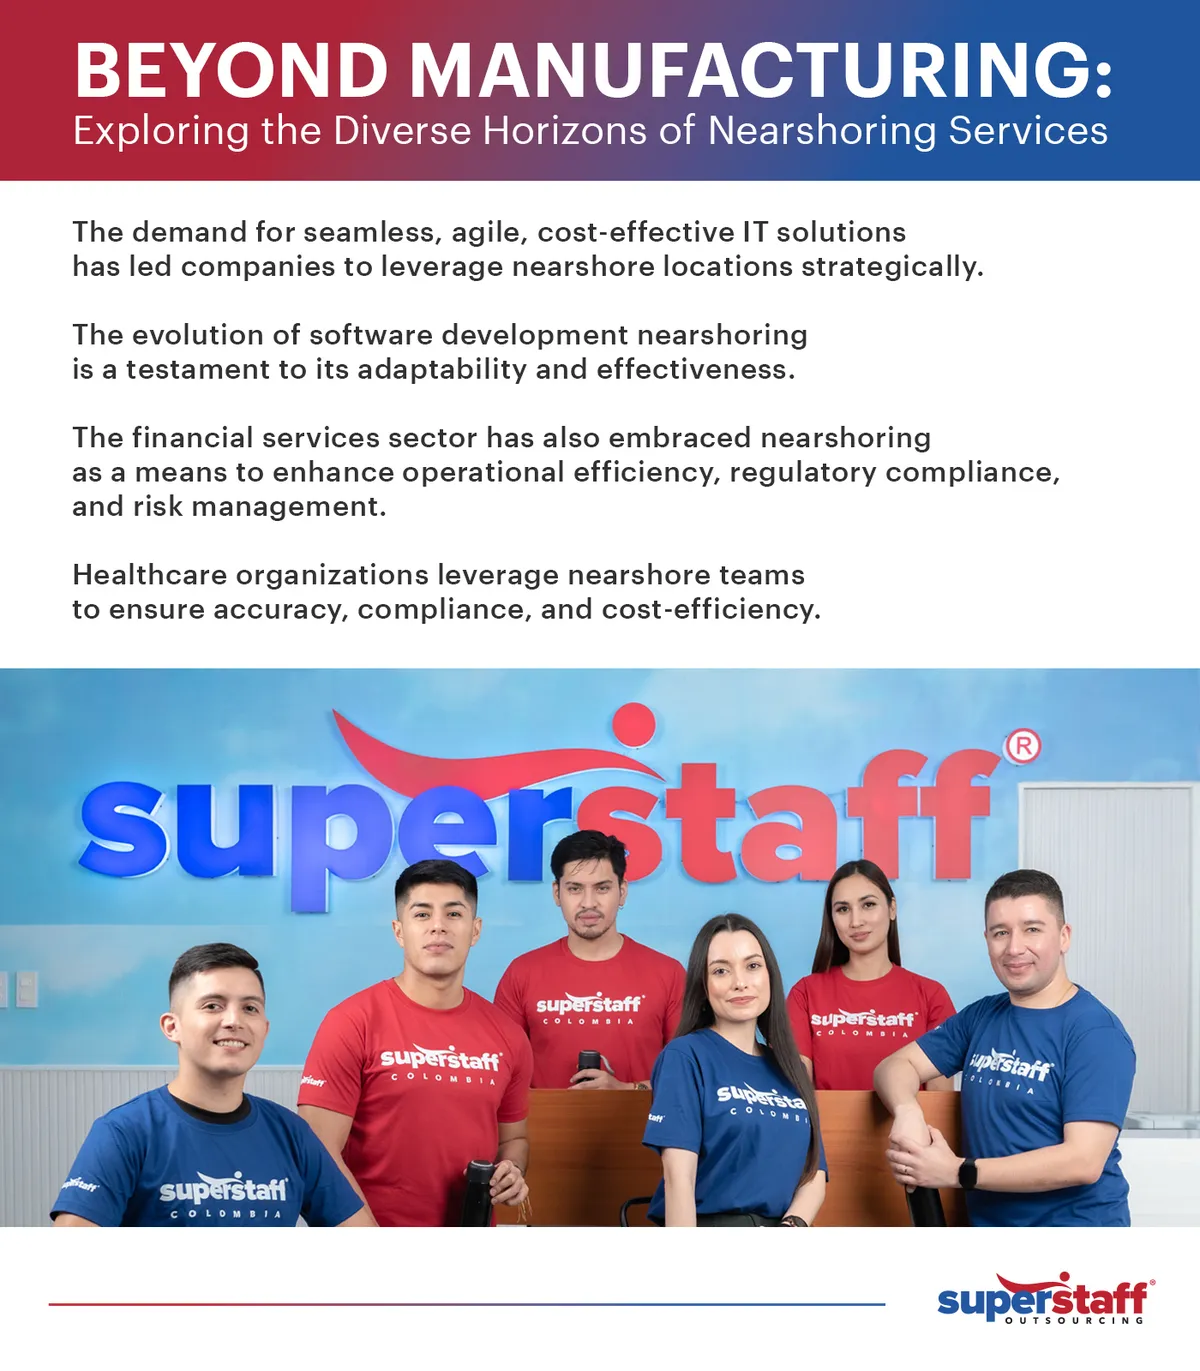 A mini infographic shows SuperStaff's team in Colombia as we leverage the advantages of nearshoring to Latin America.